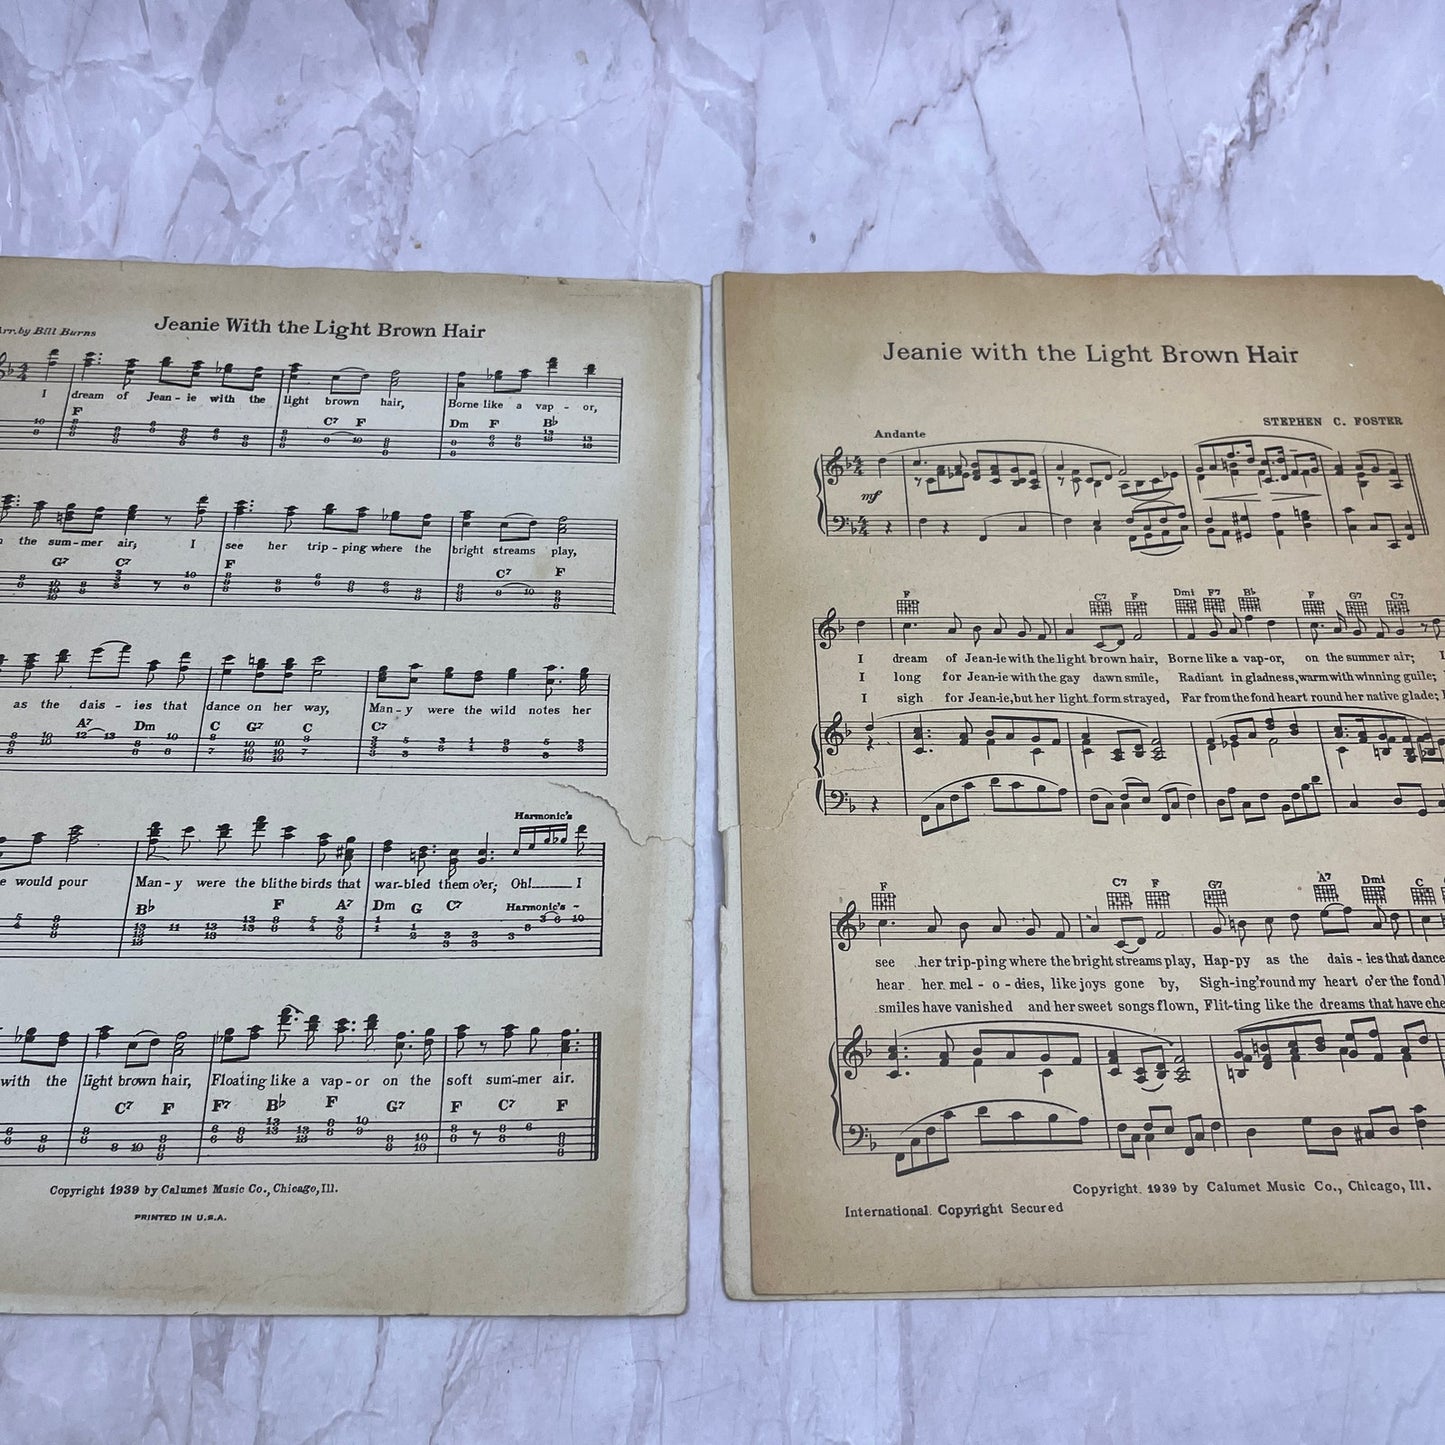 I Dream of Jeanie With the Light Brown Hair Foster Antique Sheet Music Ti5